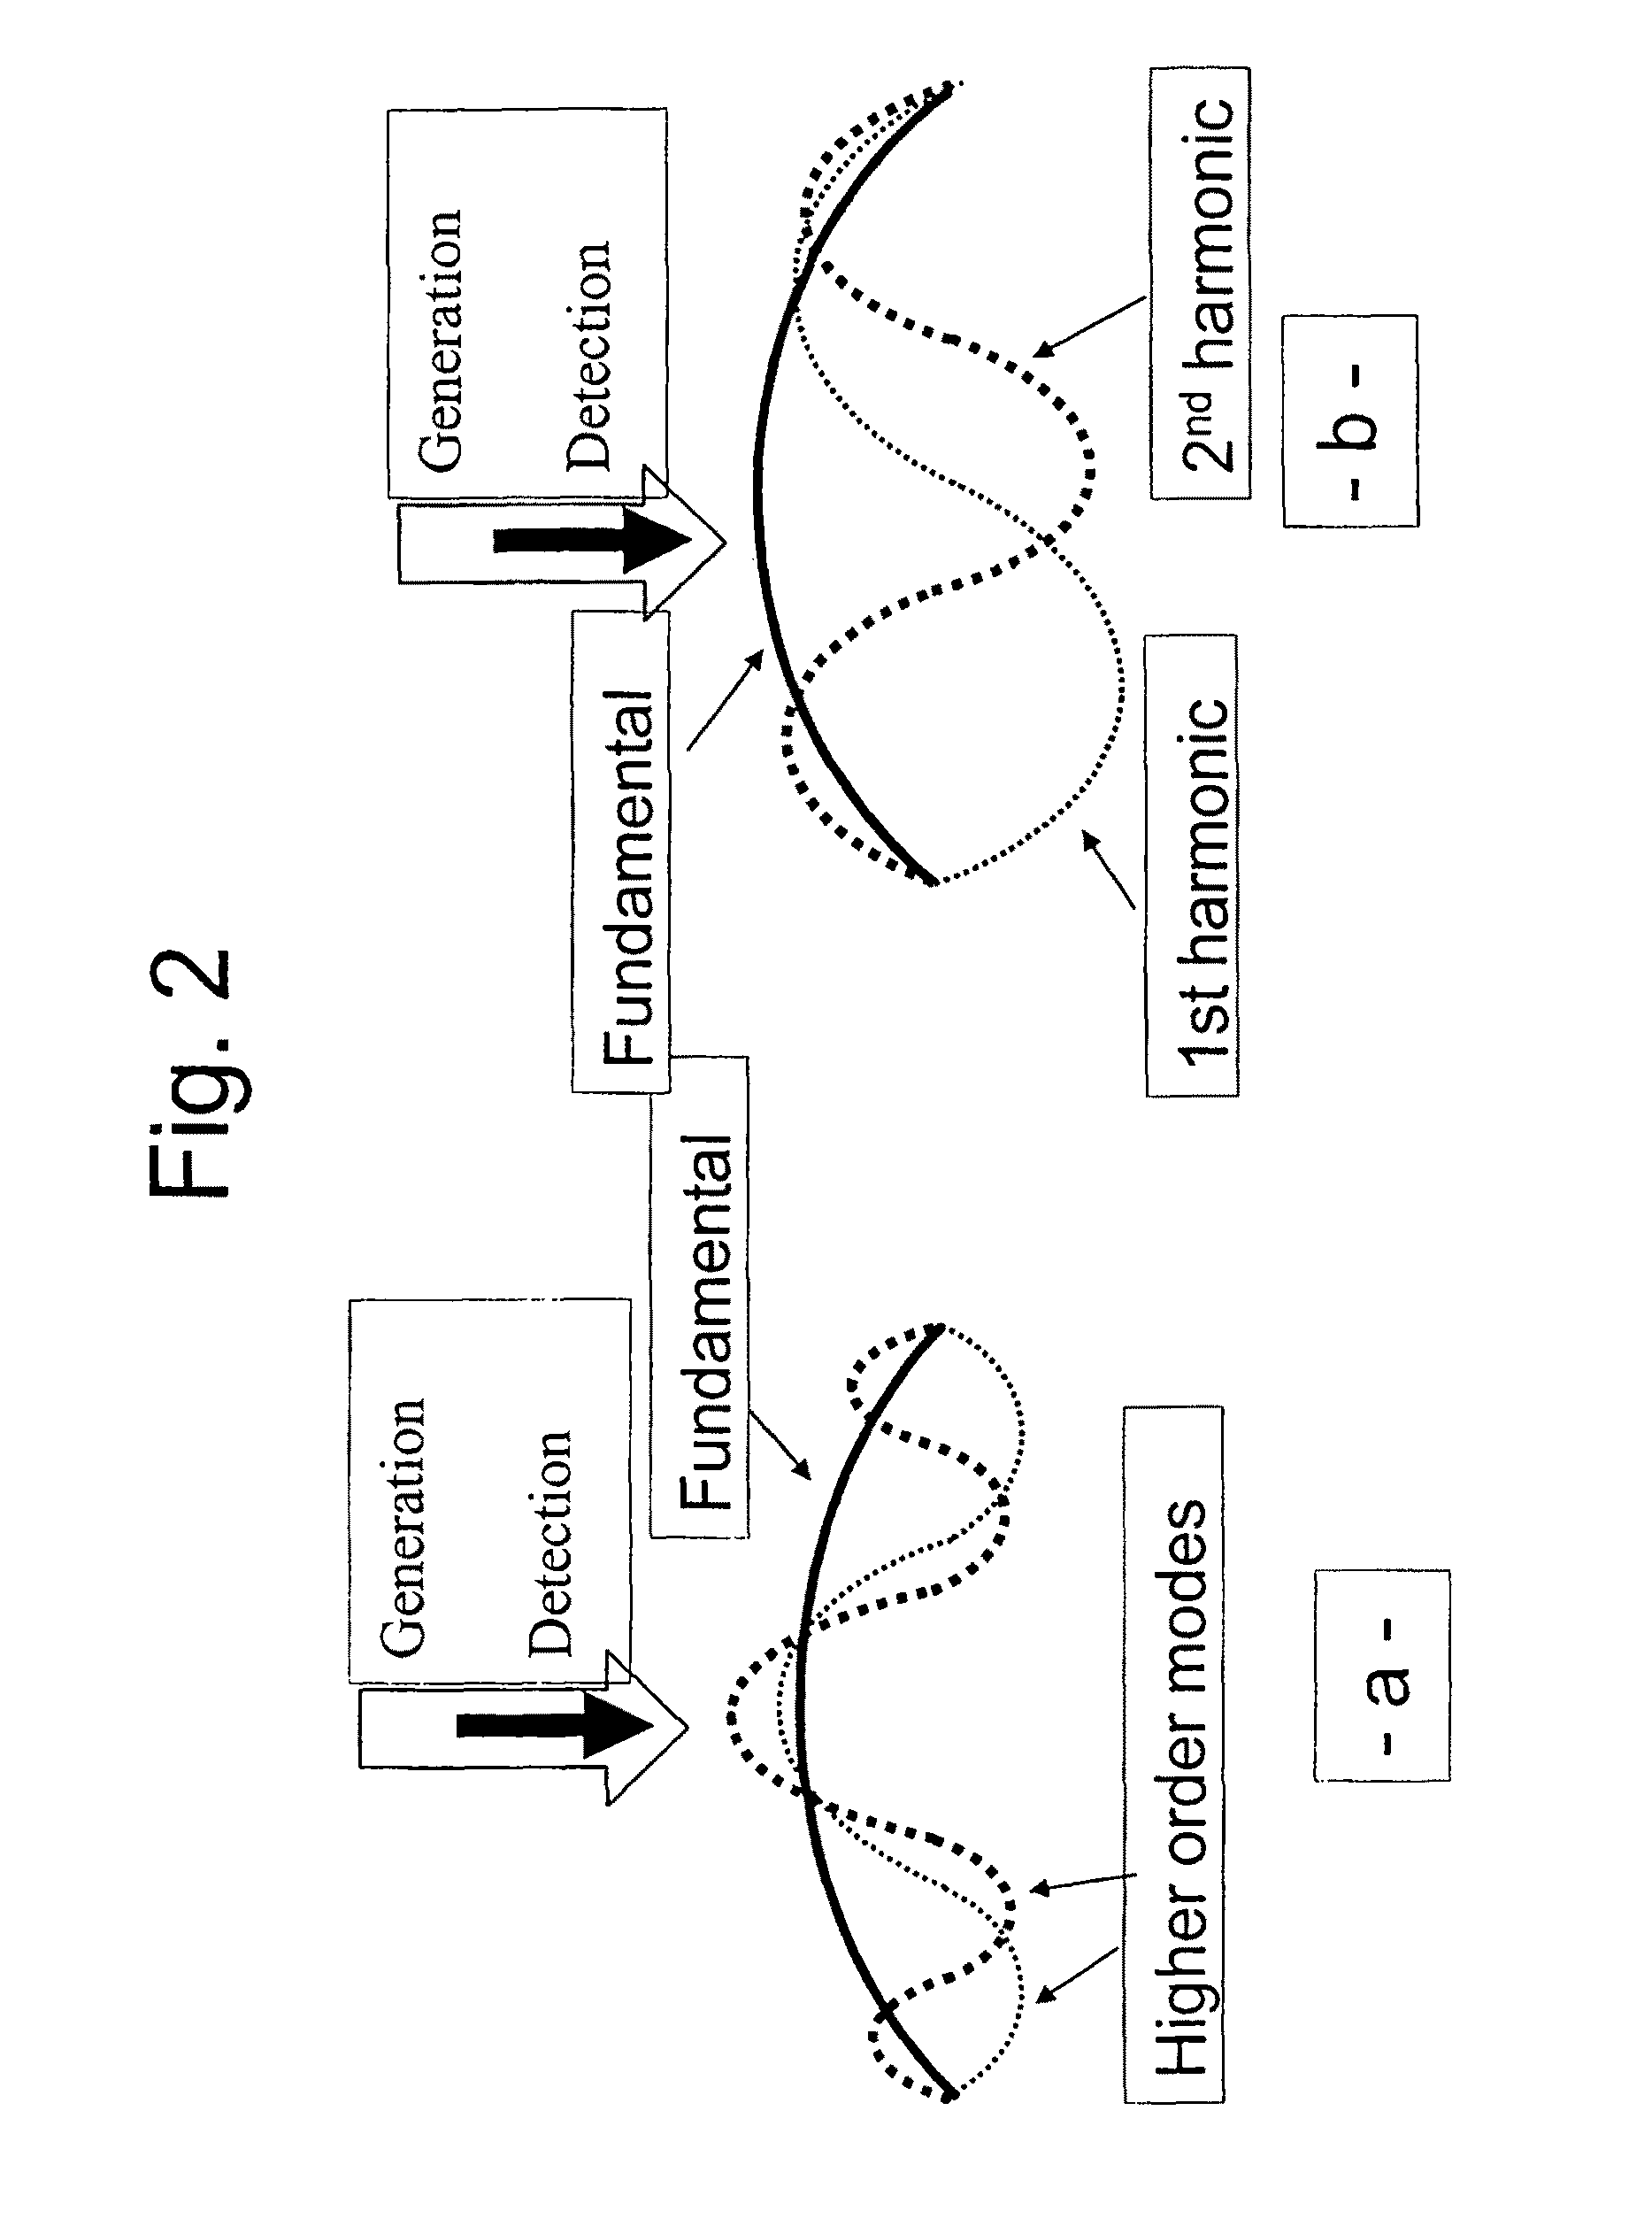 Method of assessing bond integrity in bonded structures